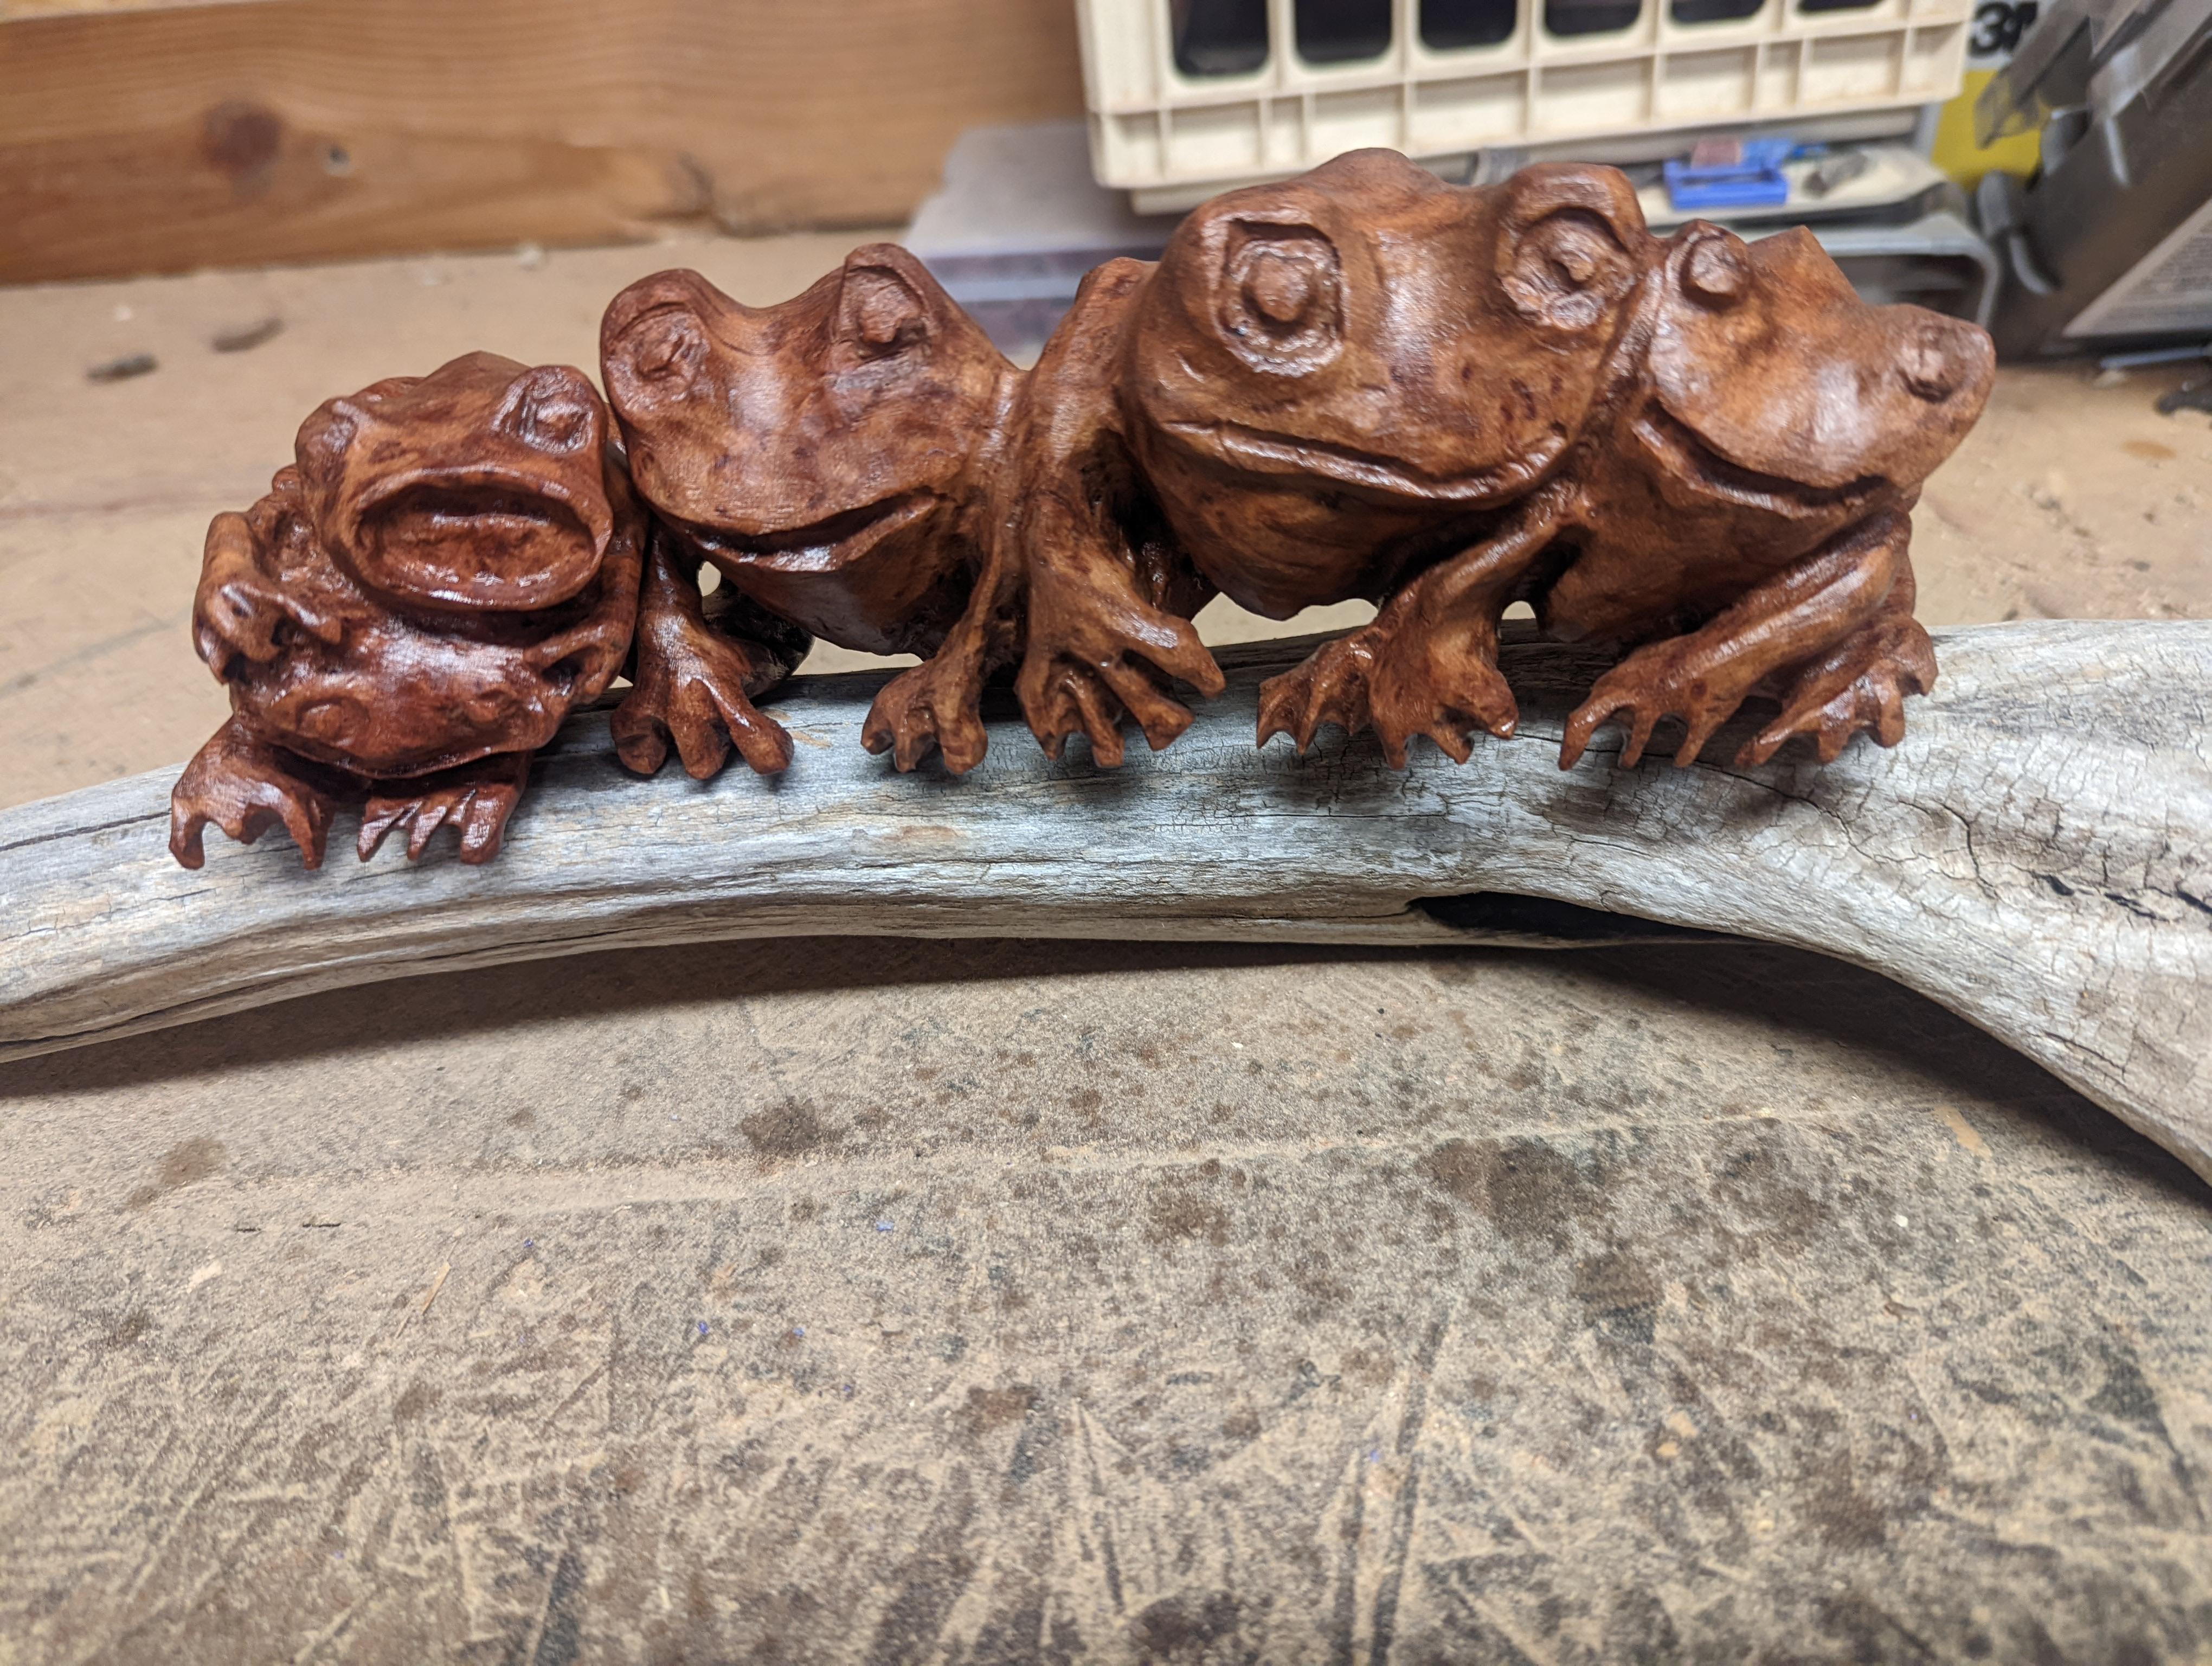 Frog singing on a log
2.0 x 5.0 x 10.0, 1.0 lbs 
Wood 
Hand signed by artist 

Artist's Commentary: 
